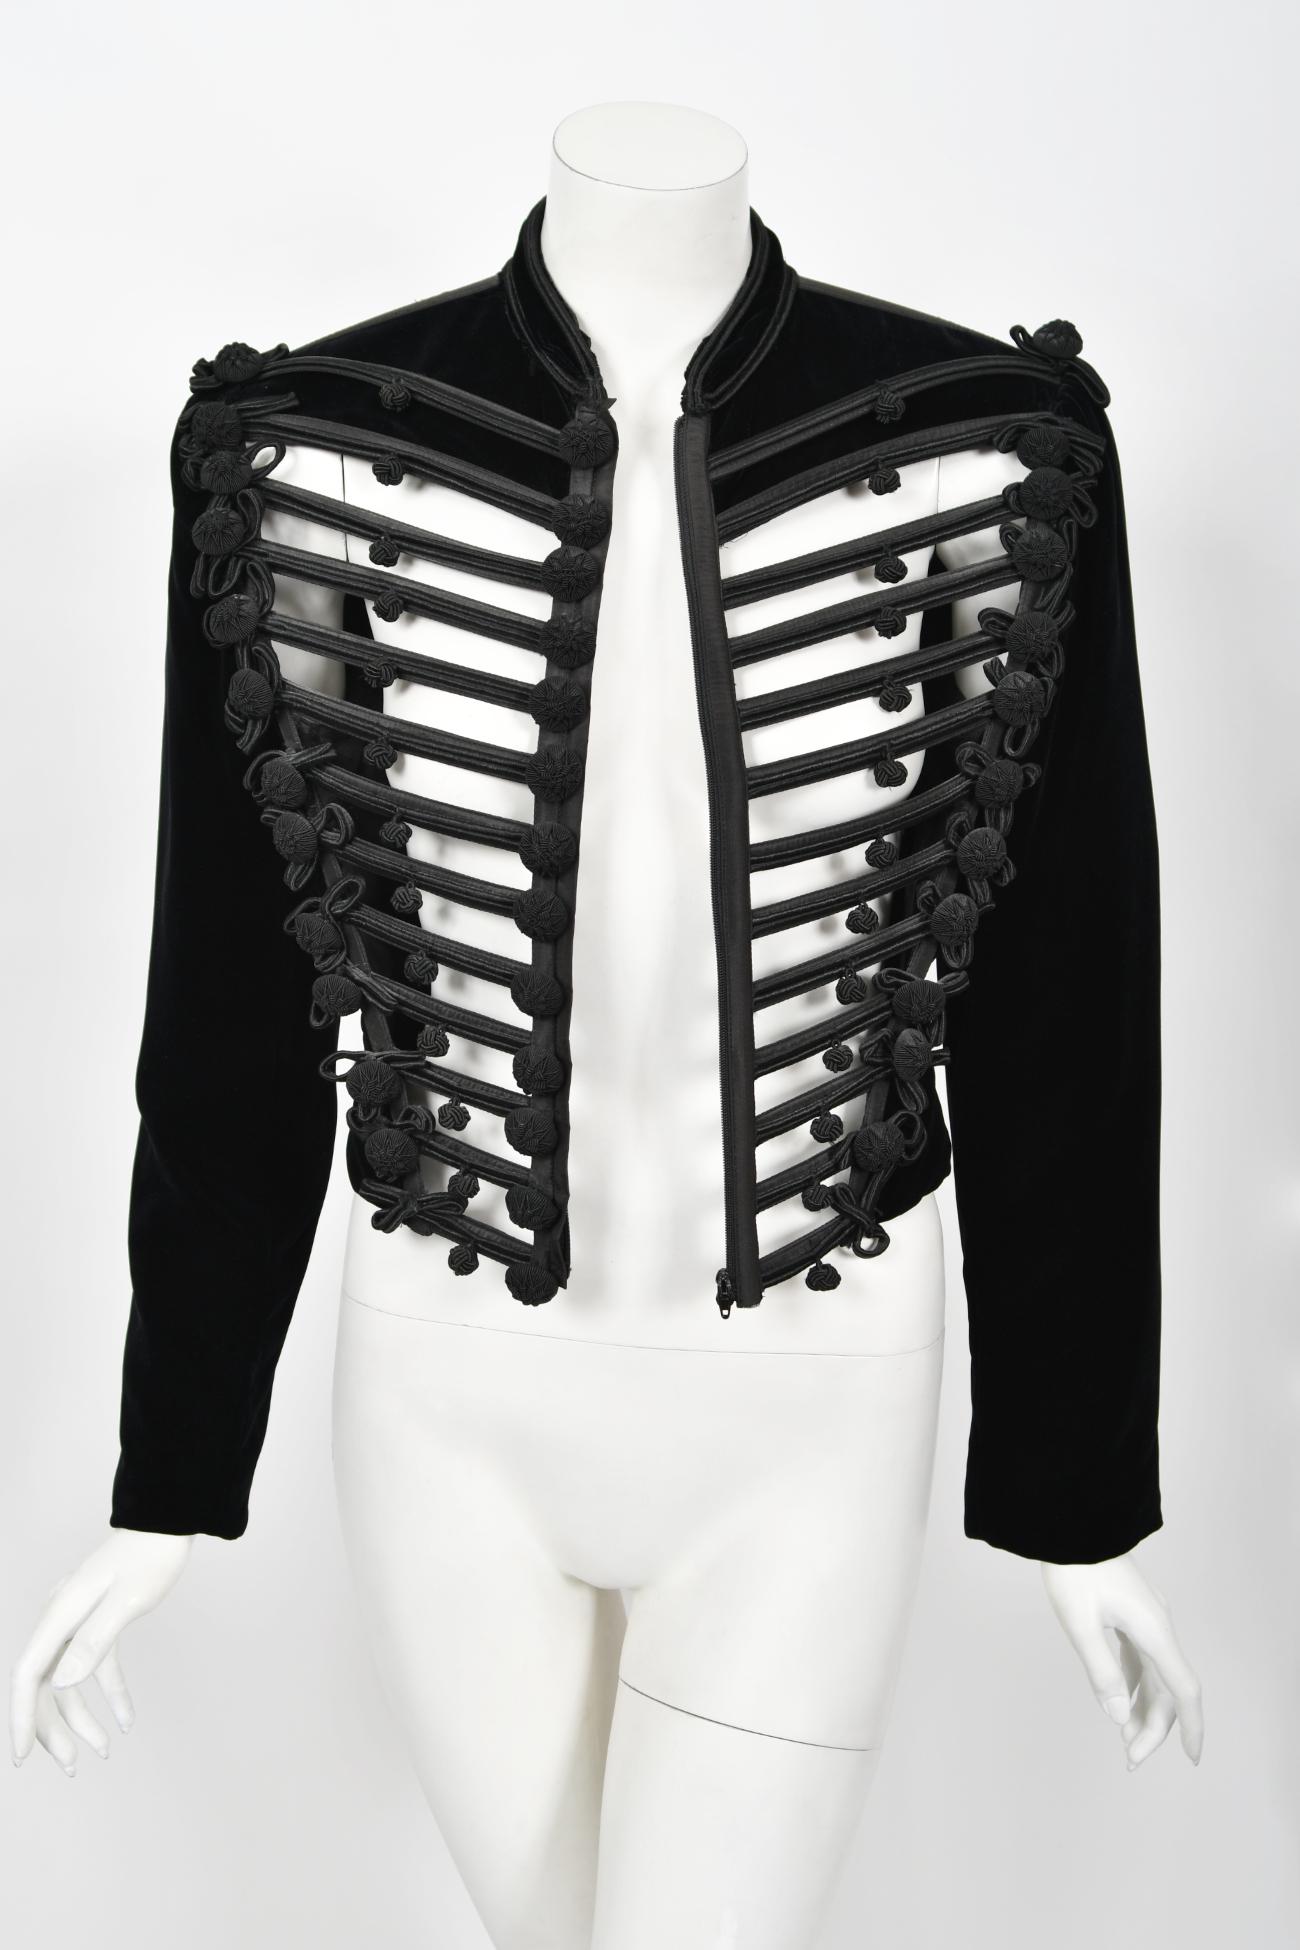 1991 Jean Paul Gaultier Documented Cher Worn Black Velvet Corset Cage Jacket  In Good Condition For Sale In Beverly Hills, CA